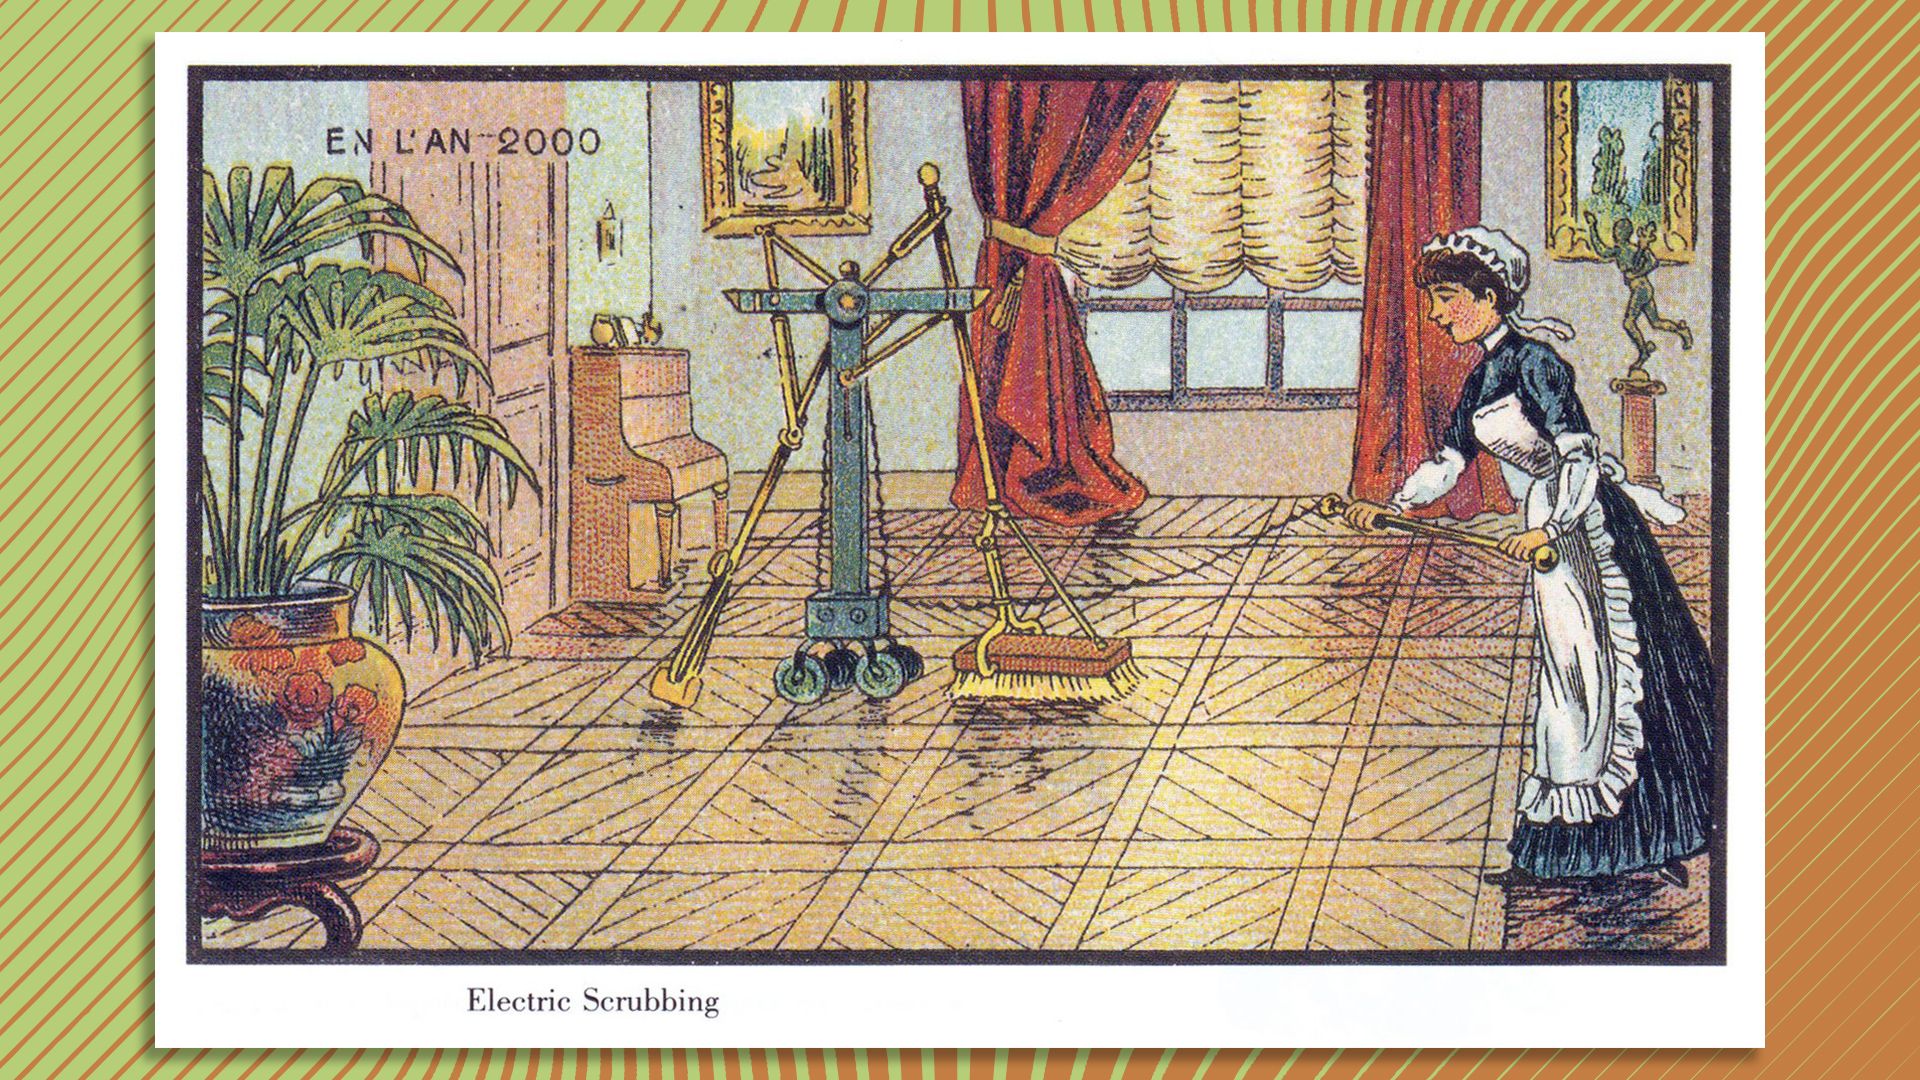 Hand drawn picture of a maid in the 1900s directing a robot to clean the floors.